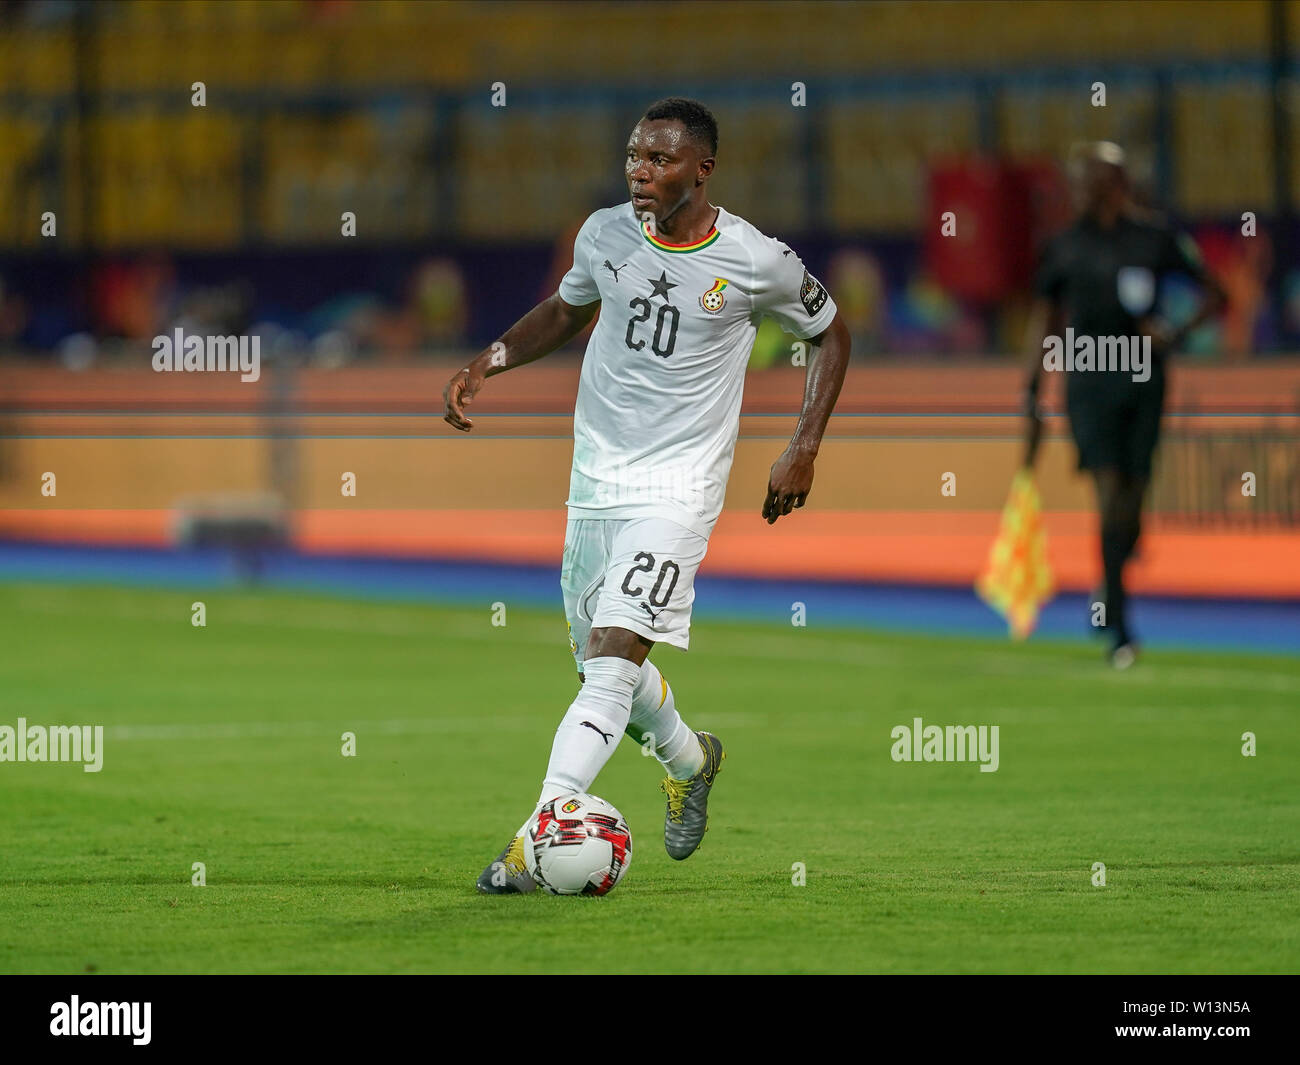 Ismailia, Egypt. 29th June, 2019. Kwadwo Asamoah of Ghana during the 2019 African Cup of Nations match between Benin and Guinea-Bissau at the Ismailia stadium in Ismailia, Egypt. Ulrik Pedersen/CSM/Alamy Live News Stock Photo